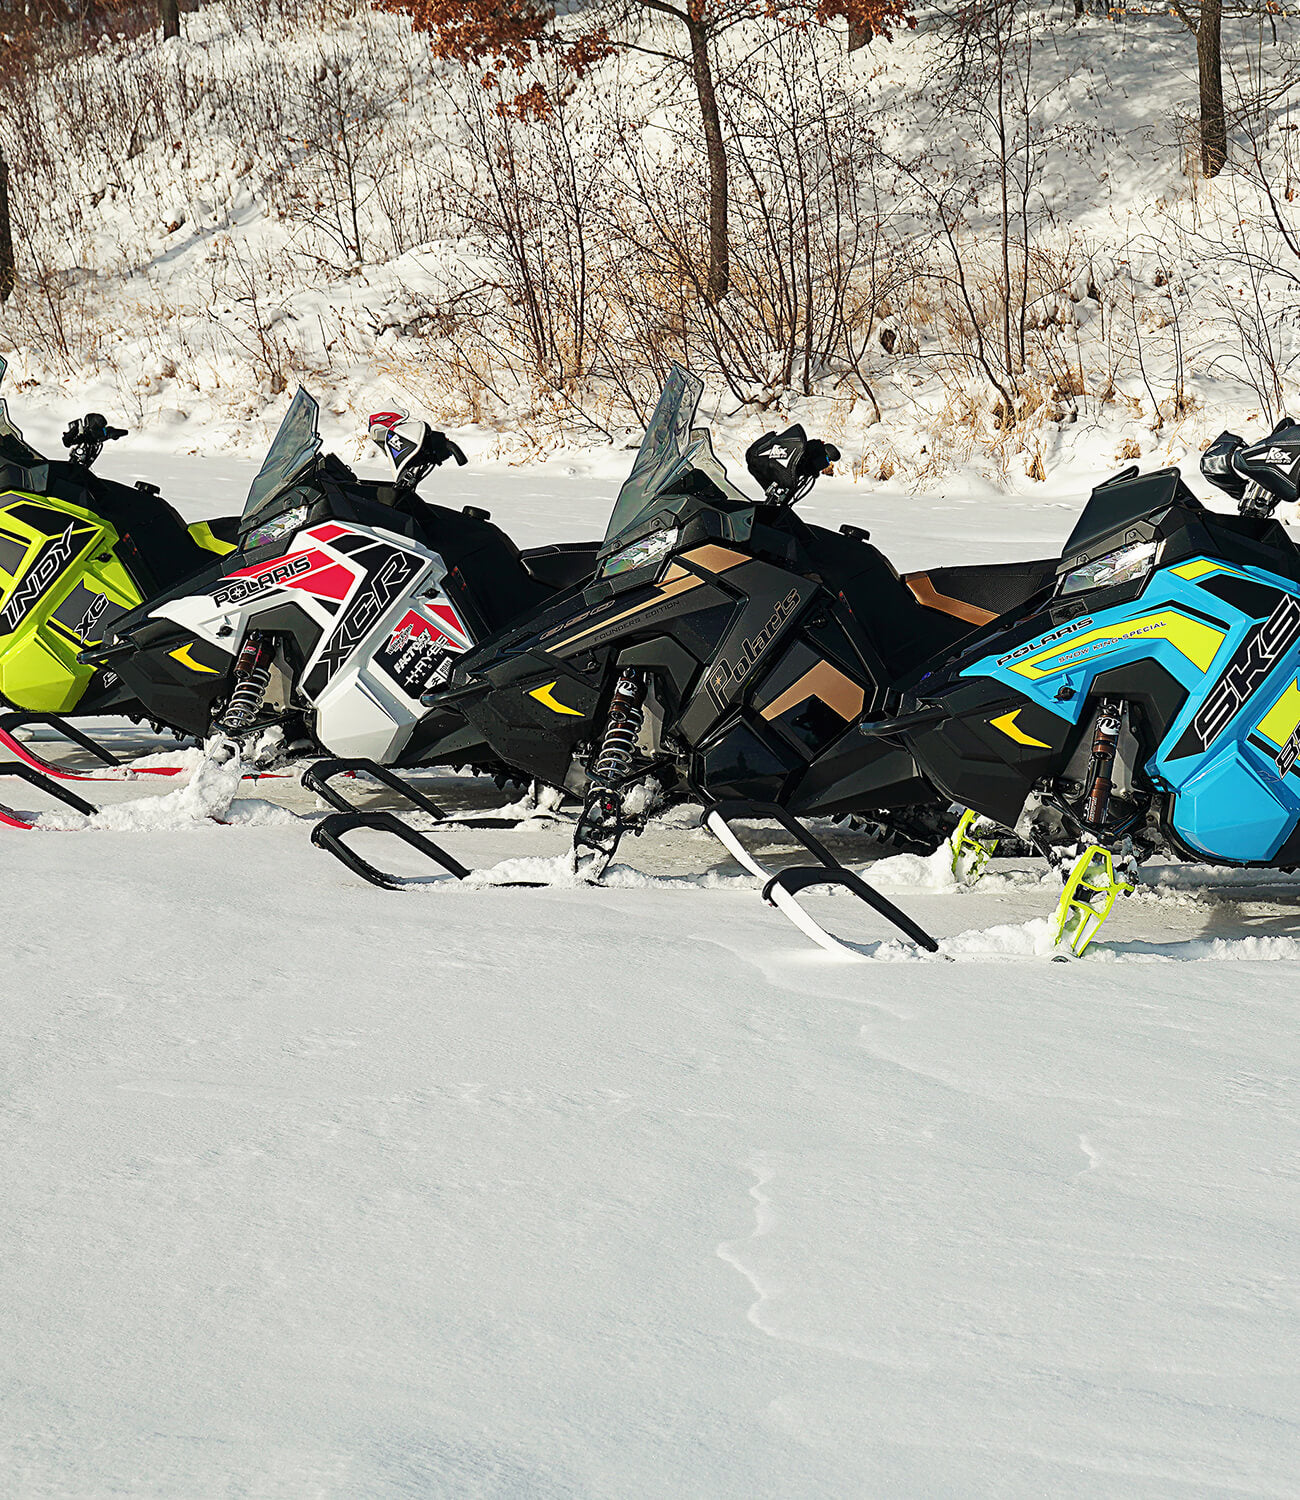 Polaris snowmobiles on a snowy trail equipped with C&A Pro Snowmobile Skis for trail riding.